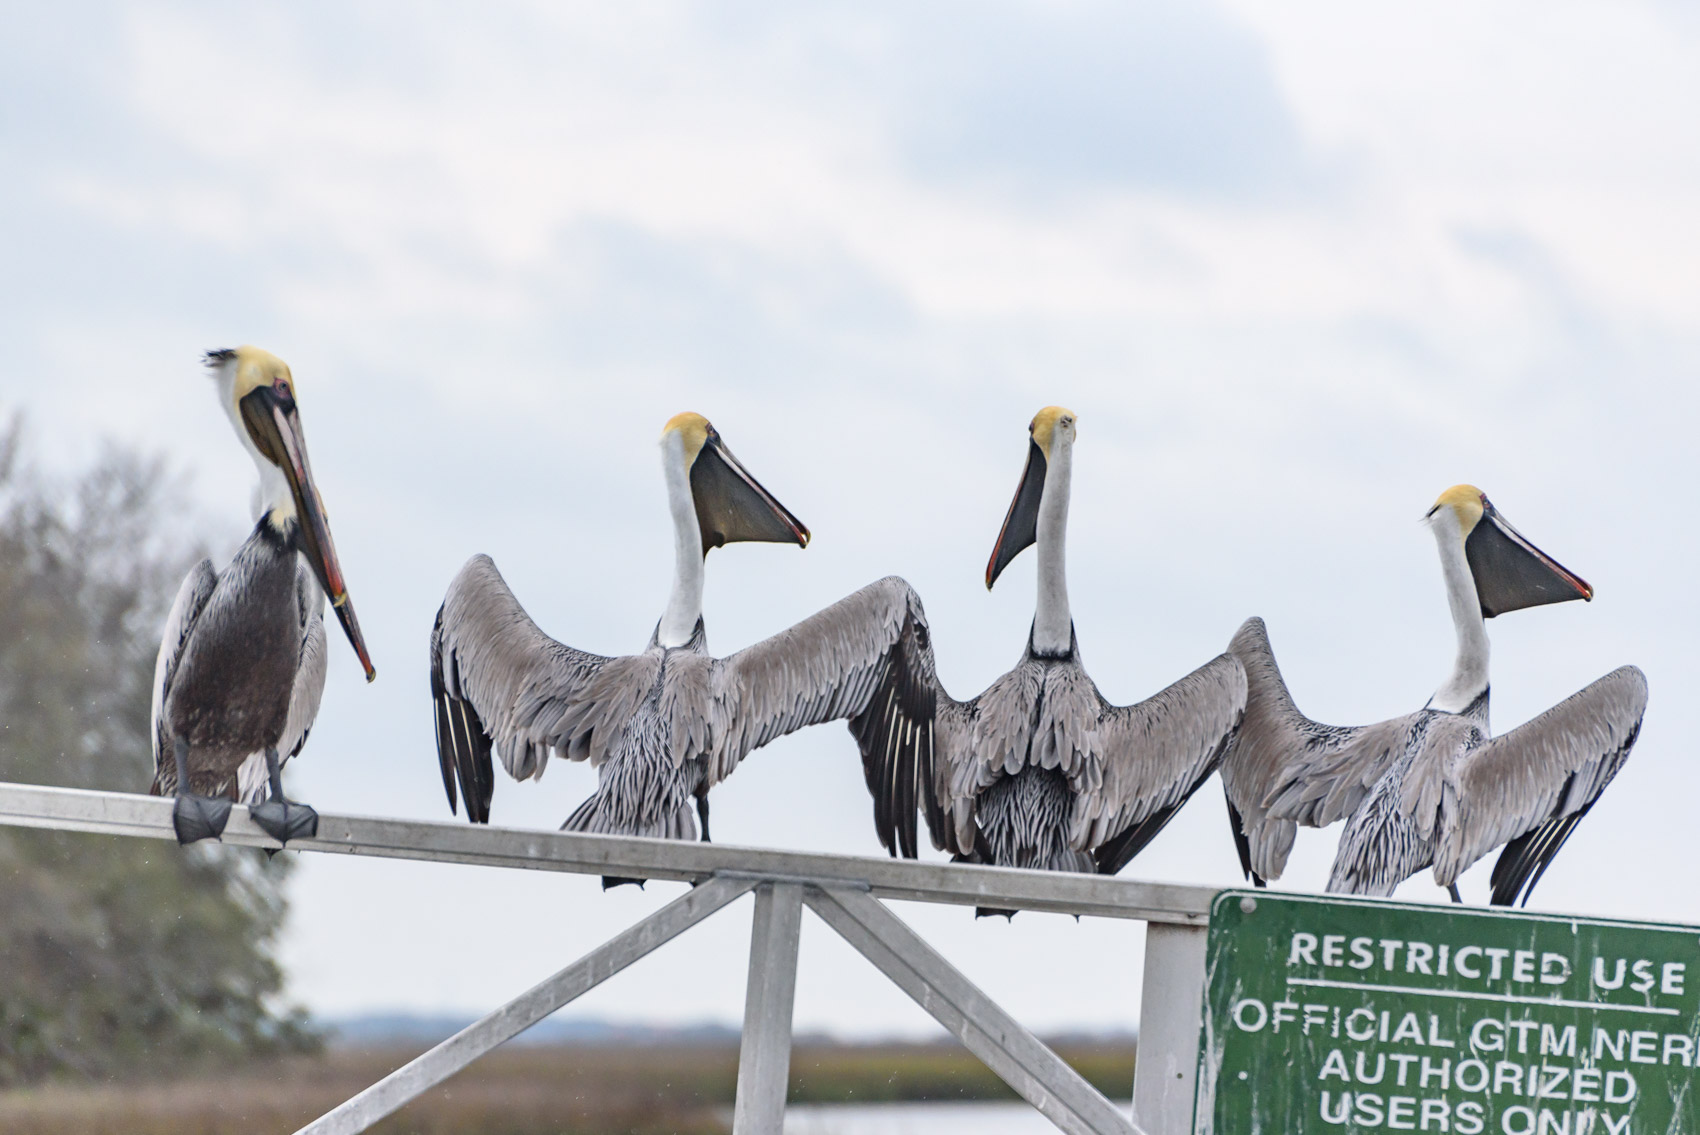 Four Brown pelicans perched on a gate at Guana Tolomato Matanzas National Estuarine Research Reserve